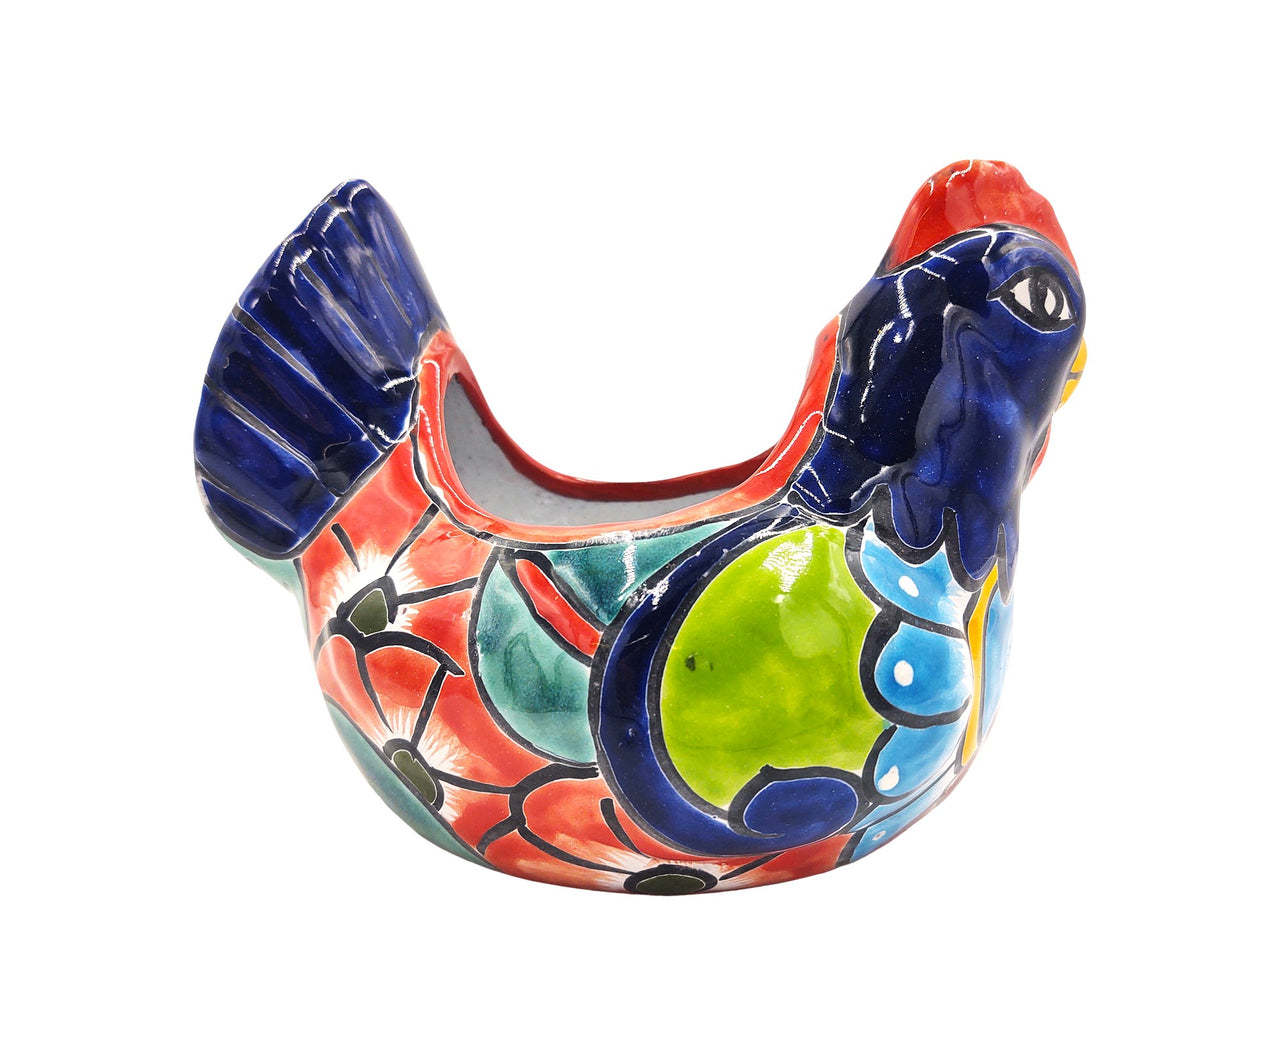 Mexican Talavera Gallina Chica (Small Chicken) Mexican Planter Pot Hand Painted  Décor Hen Planter - Red Trim